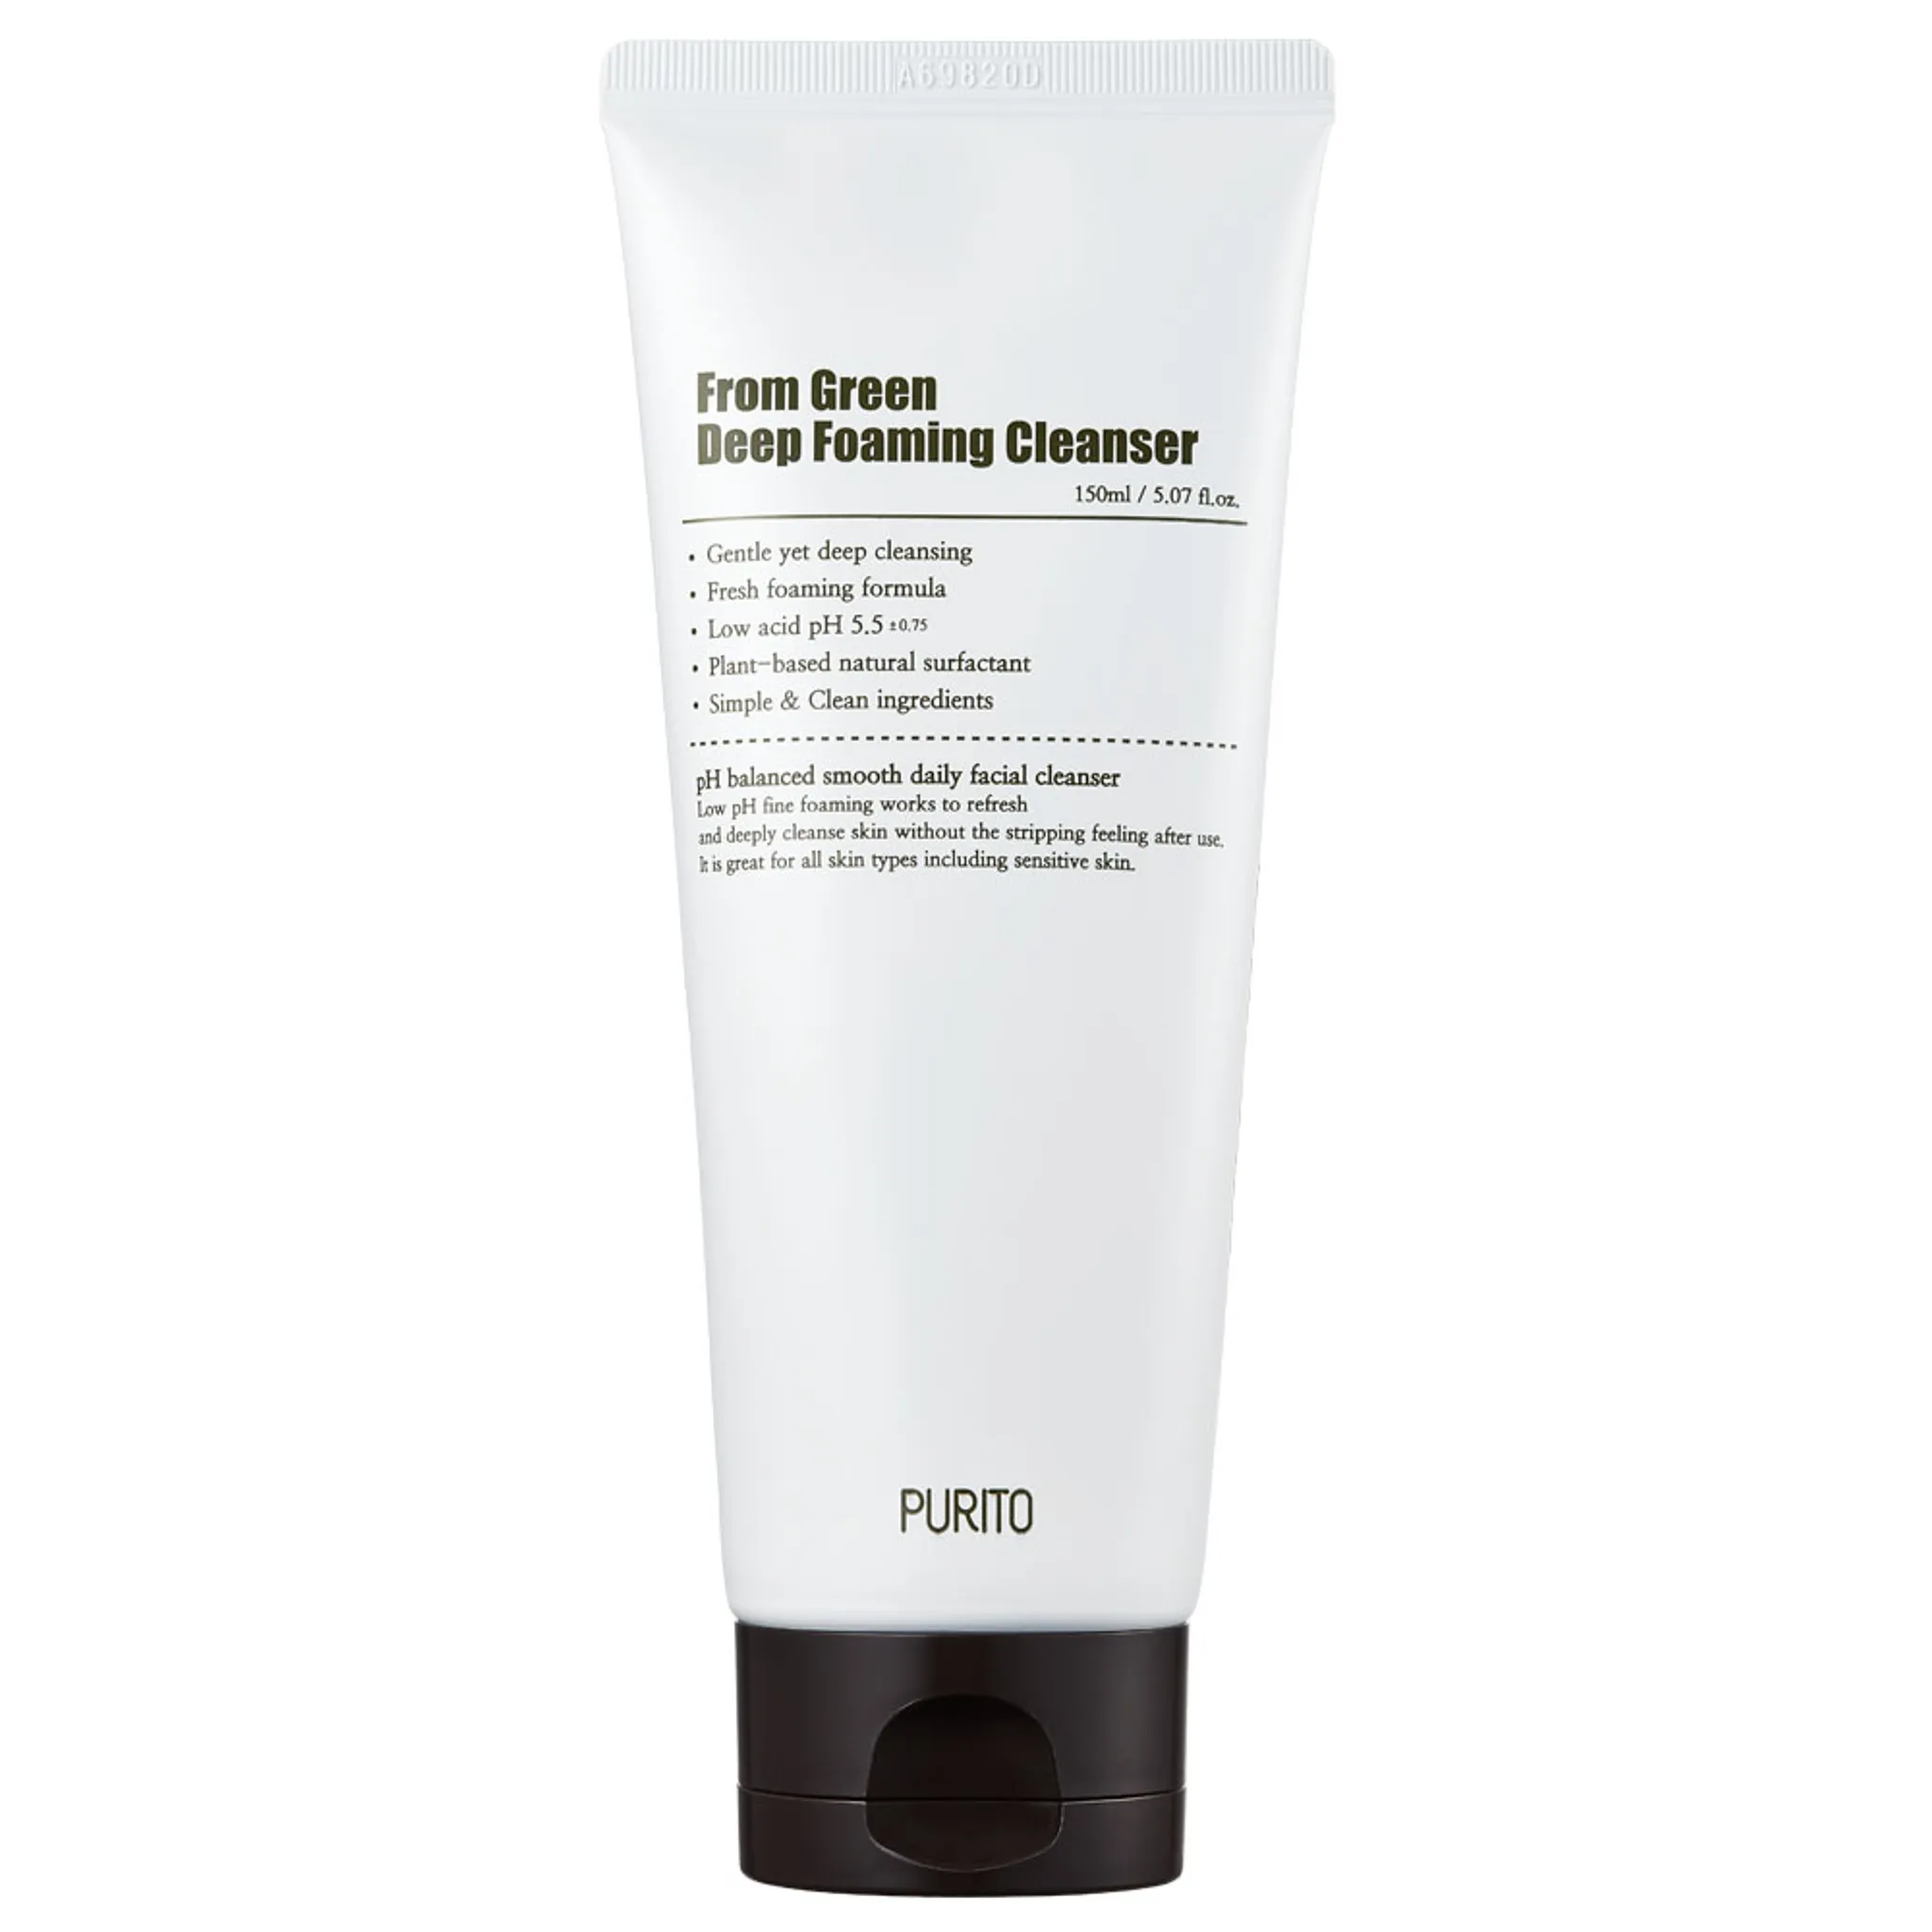 Purito From Green Deep Cleanser Foaming